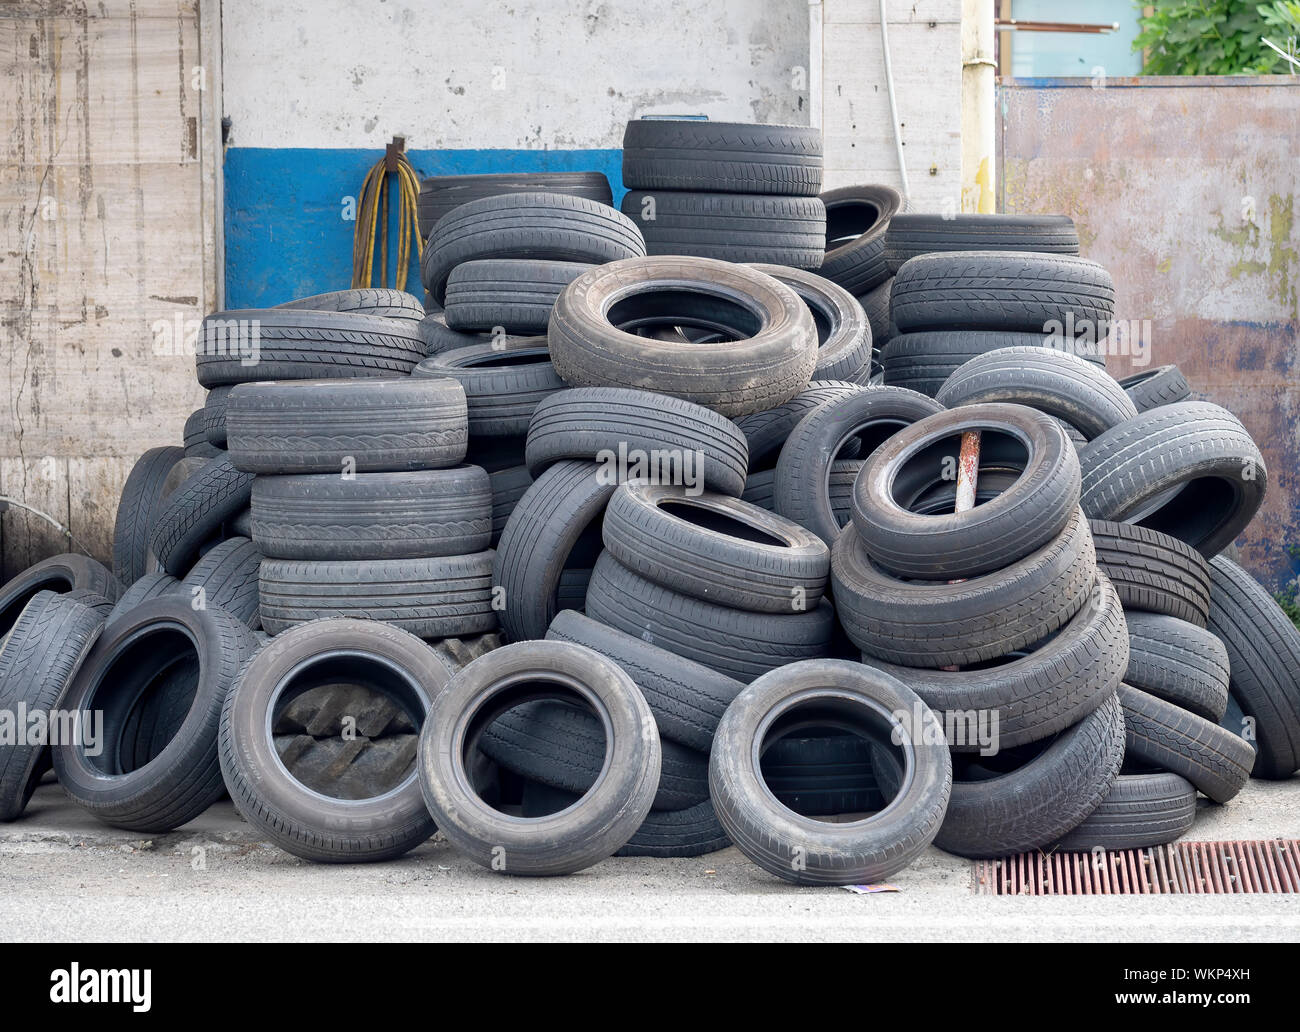 AULLA, MASSA CARRARA, ITALY - AUGUST 28, 2019: Old car and vehicle tyres, tires wait to be disposed of. Stock Photo